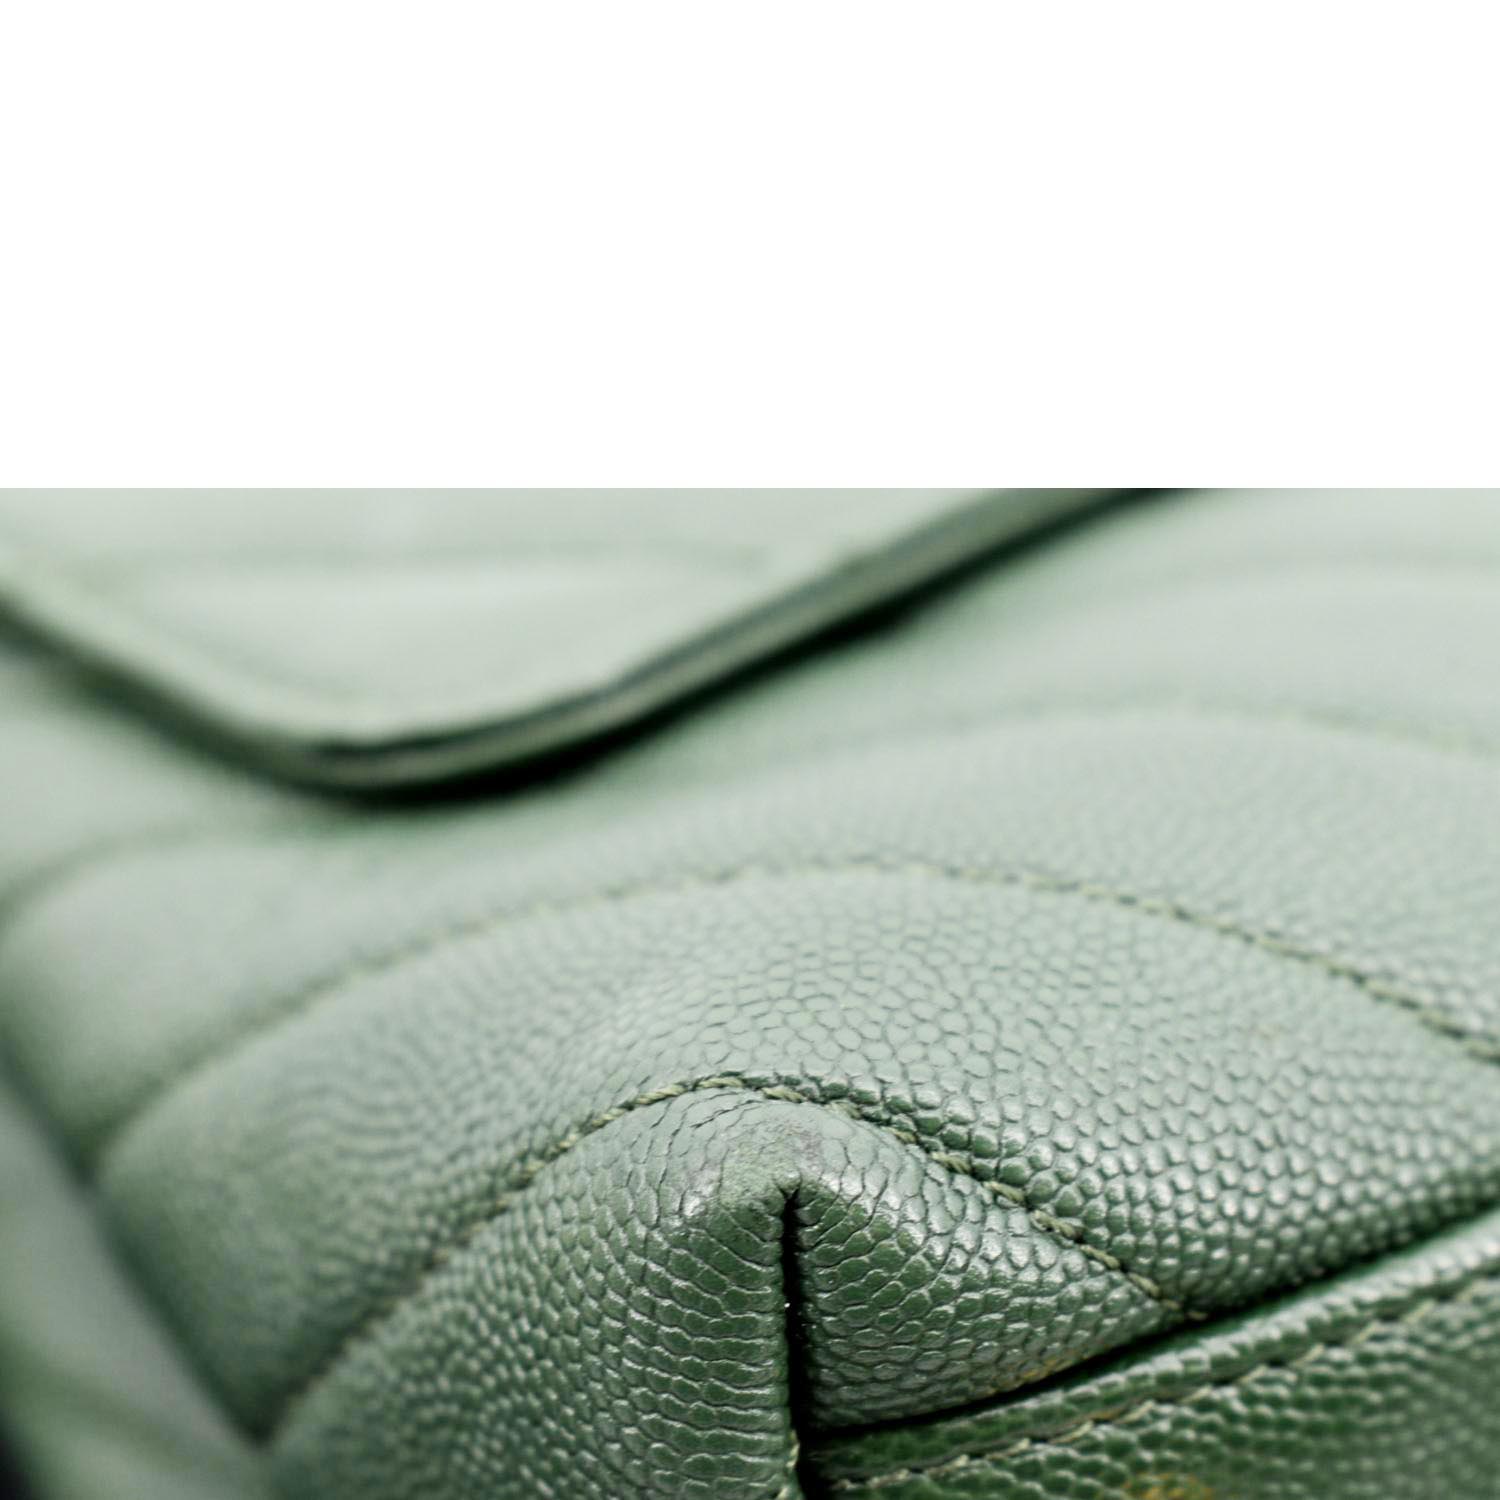 Chanel Mint Green Chevron Quilted Leather Top Handle Bag Chanel